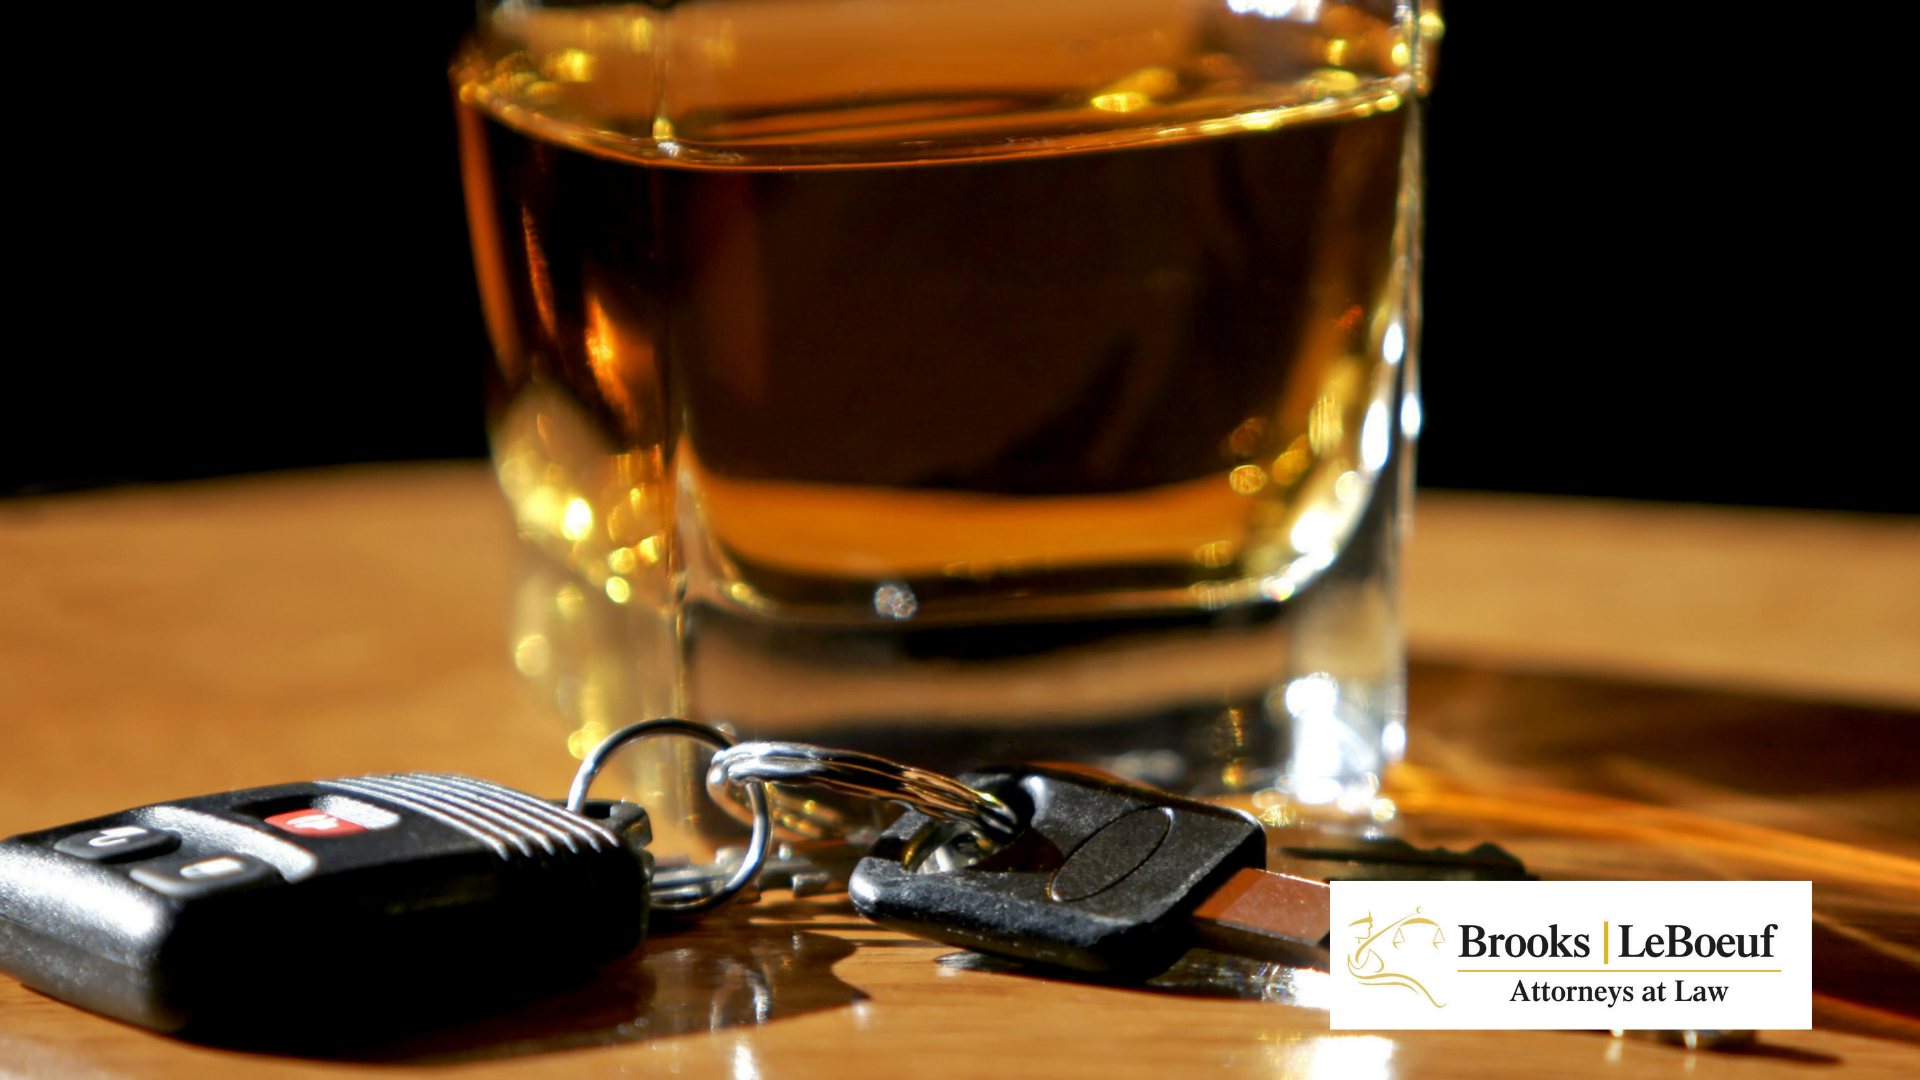 Drive Sober or Get Pulled Over | Brooks LeBoeuf